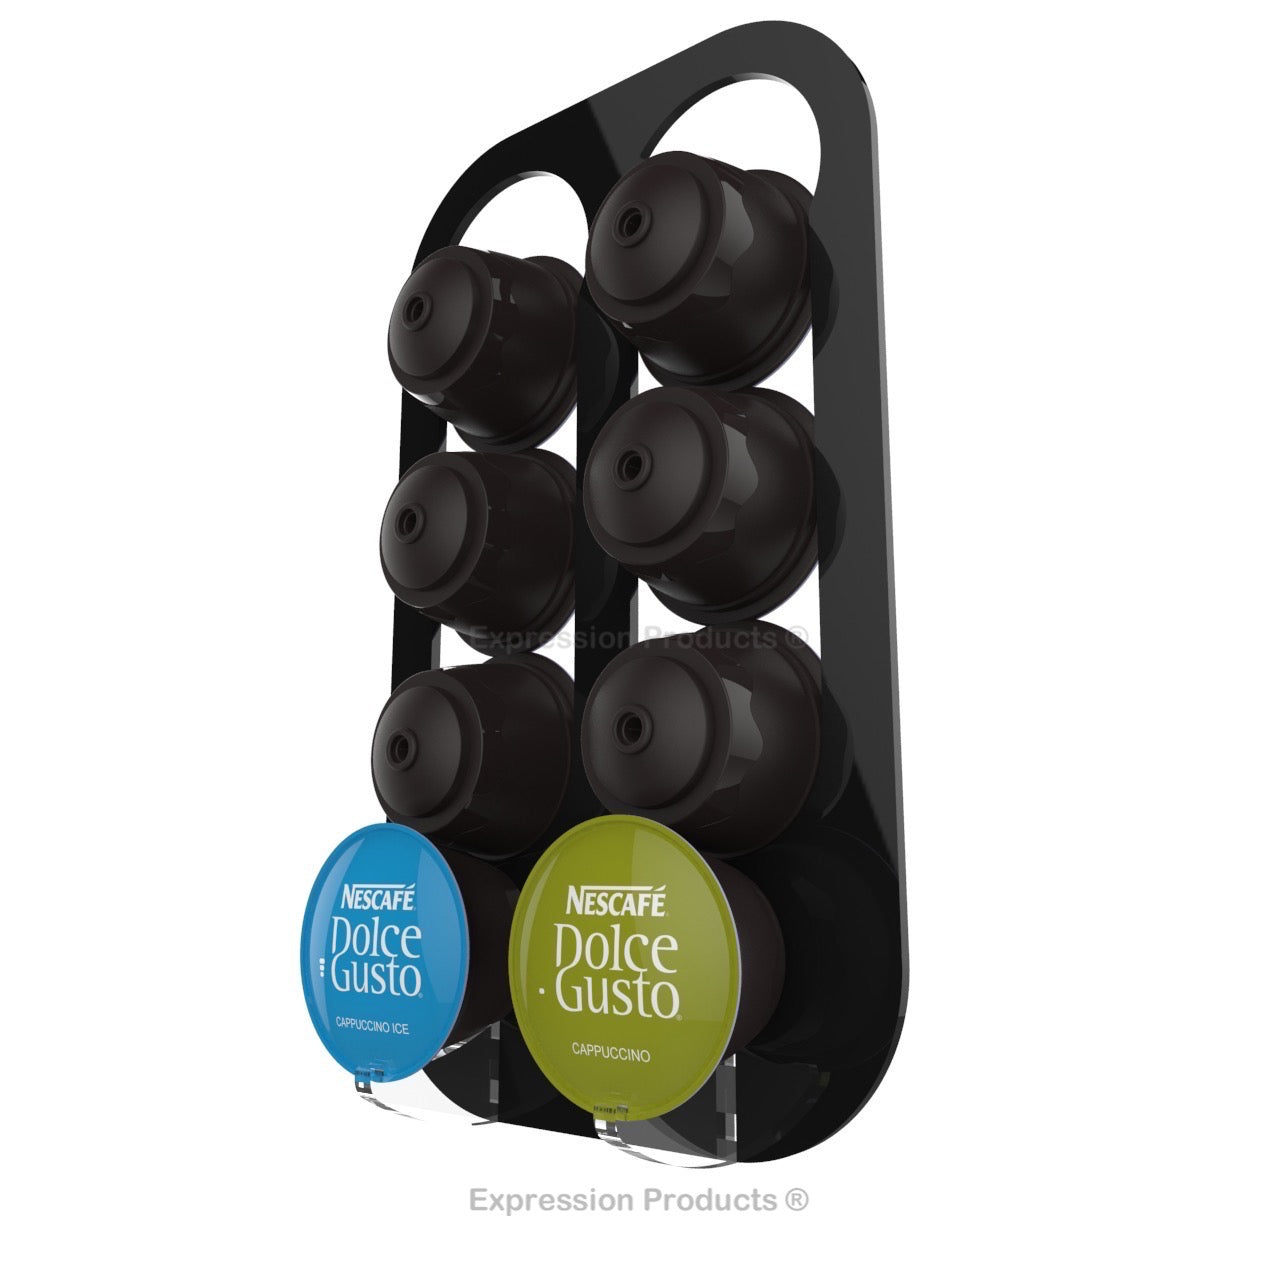 Dolce gusto coffee pod holder, wall mounted, half height.  Shown in black holding 8 pods